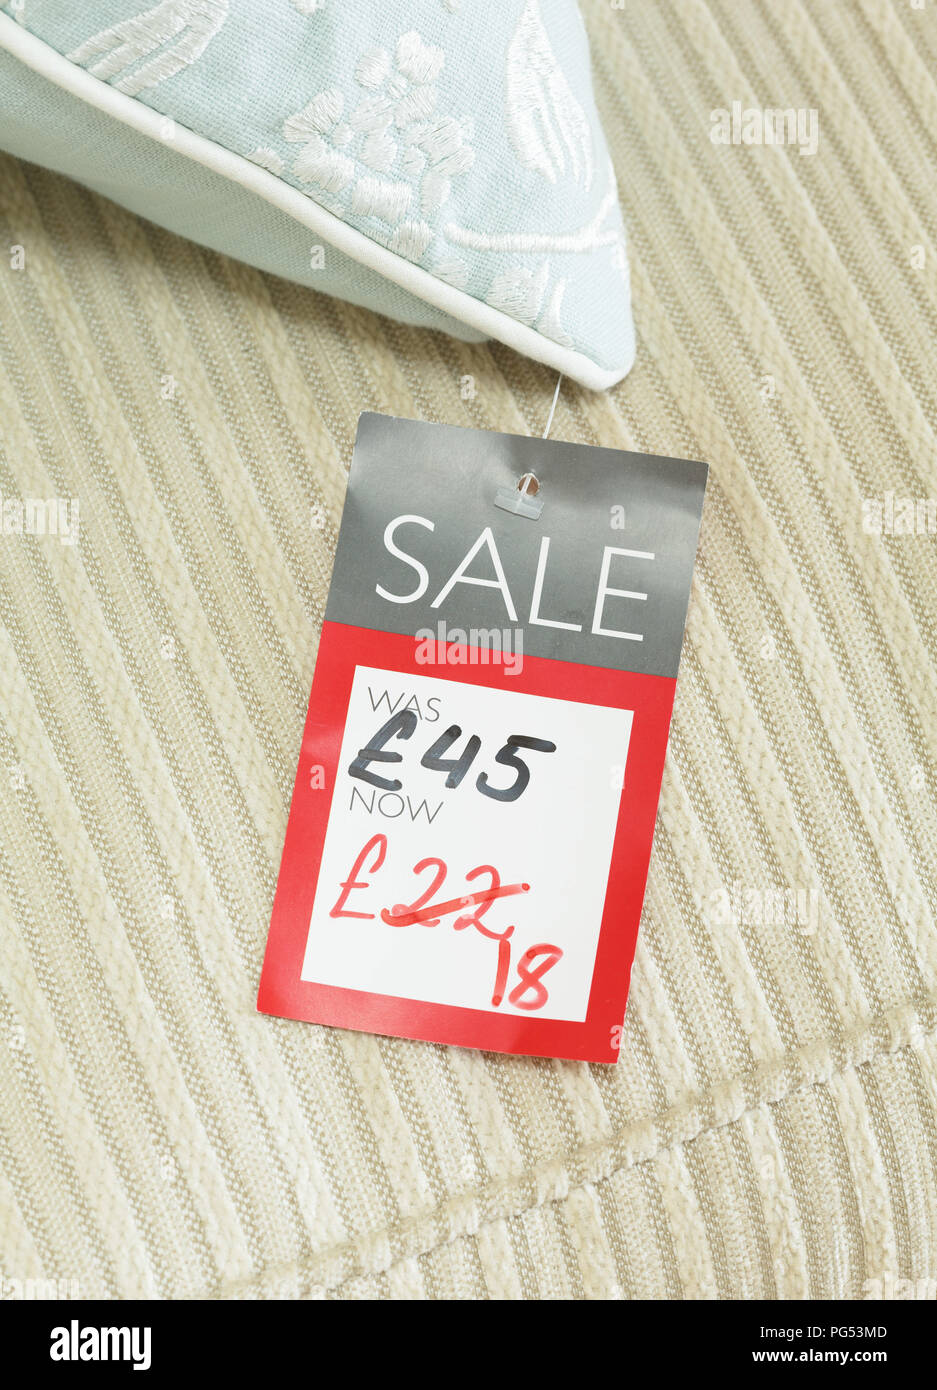 Mock-up of price tag showing reduced price of a discounted product for sale in a retail store. Priced in pounds sterling for UK market Stock Photo